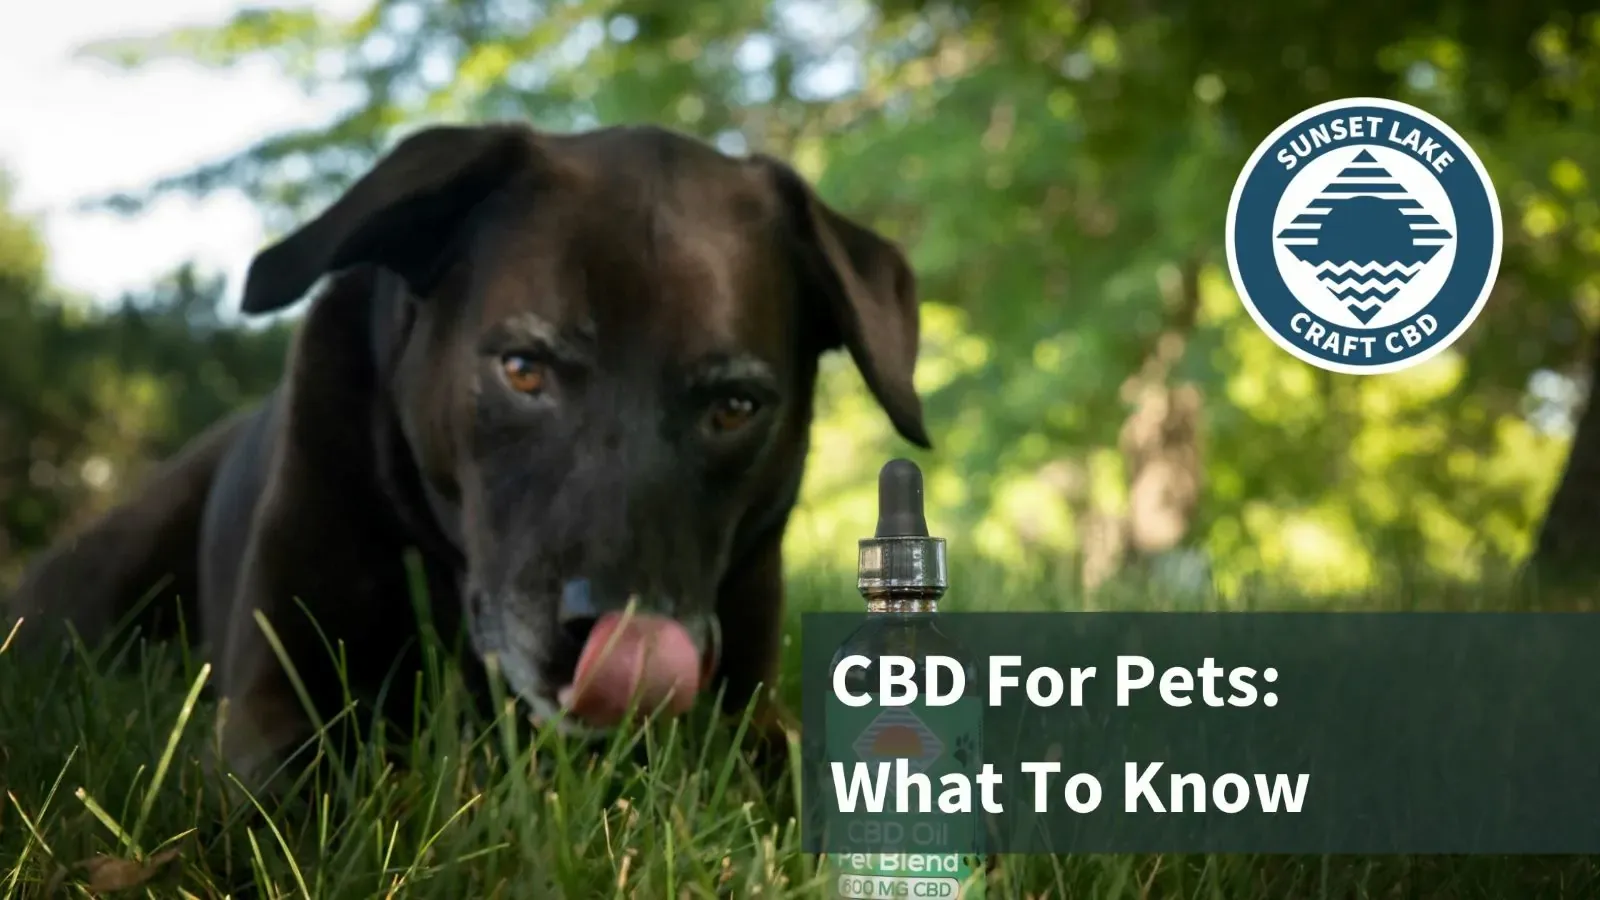 A dog next to a CBD tincture. Text reads "CBD For Pets: What to know"